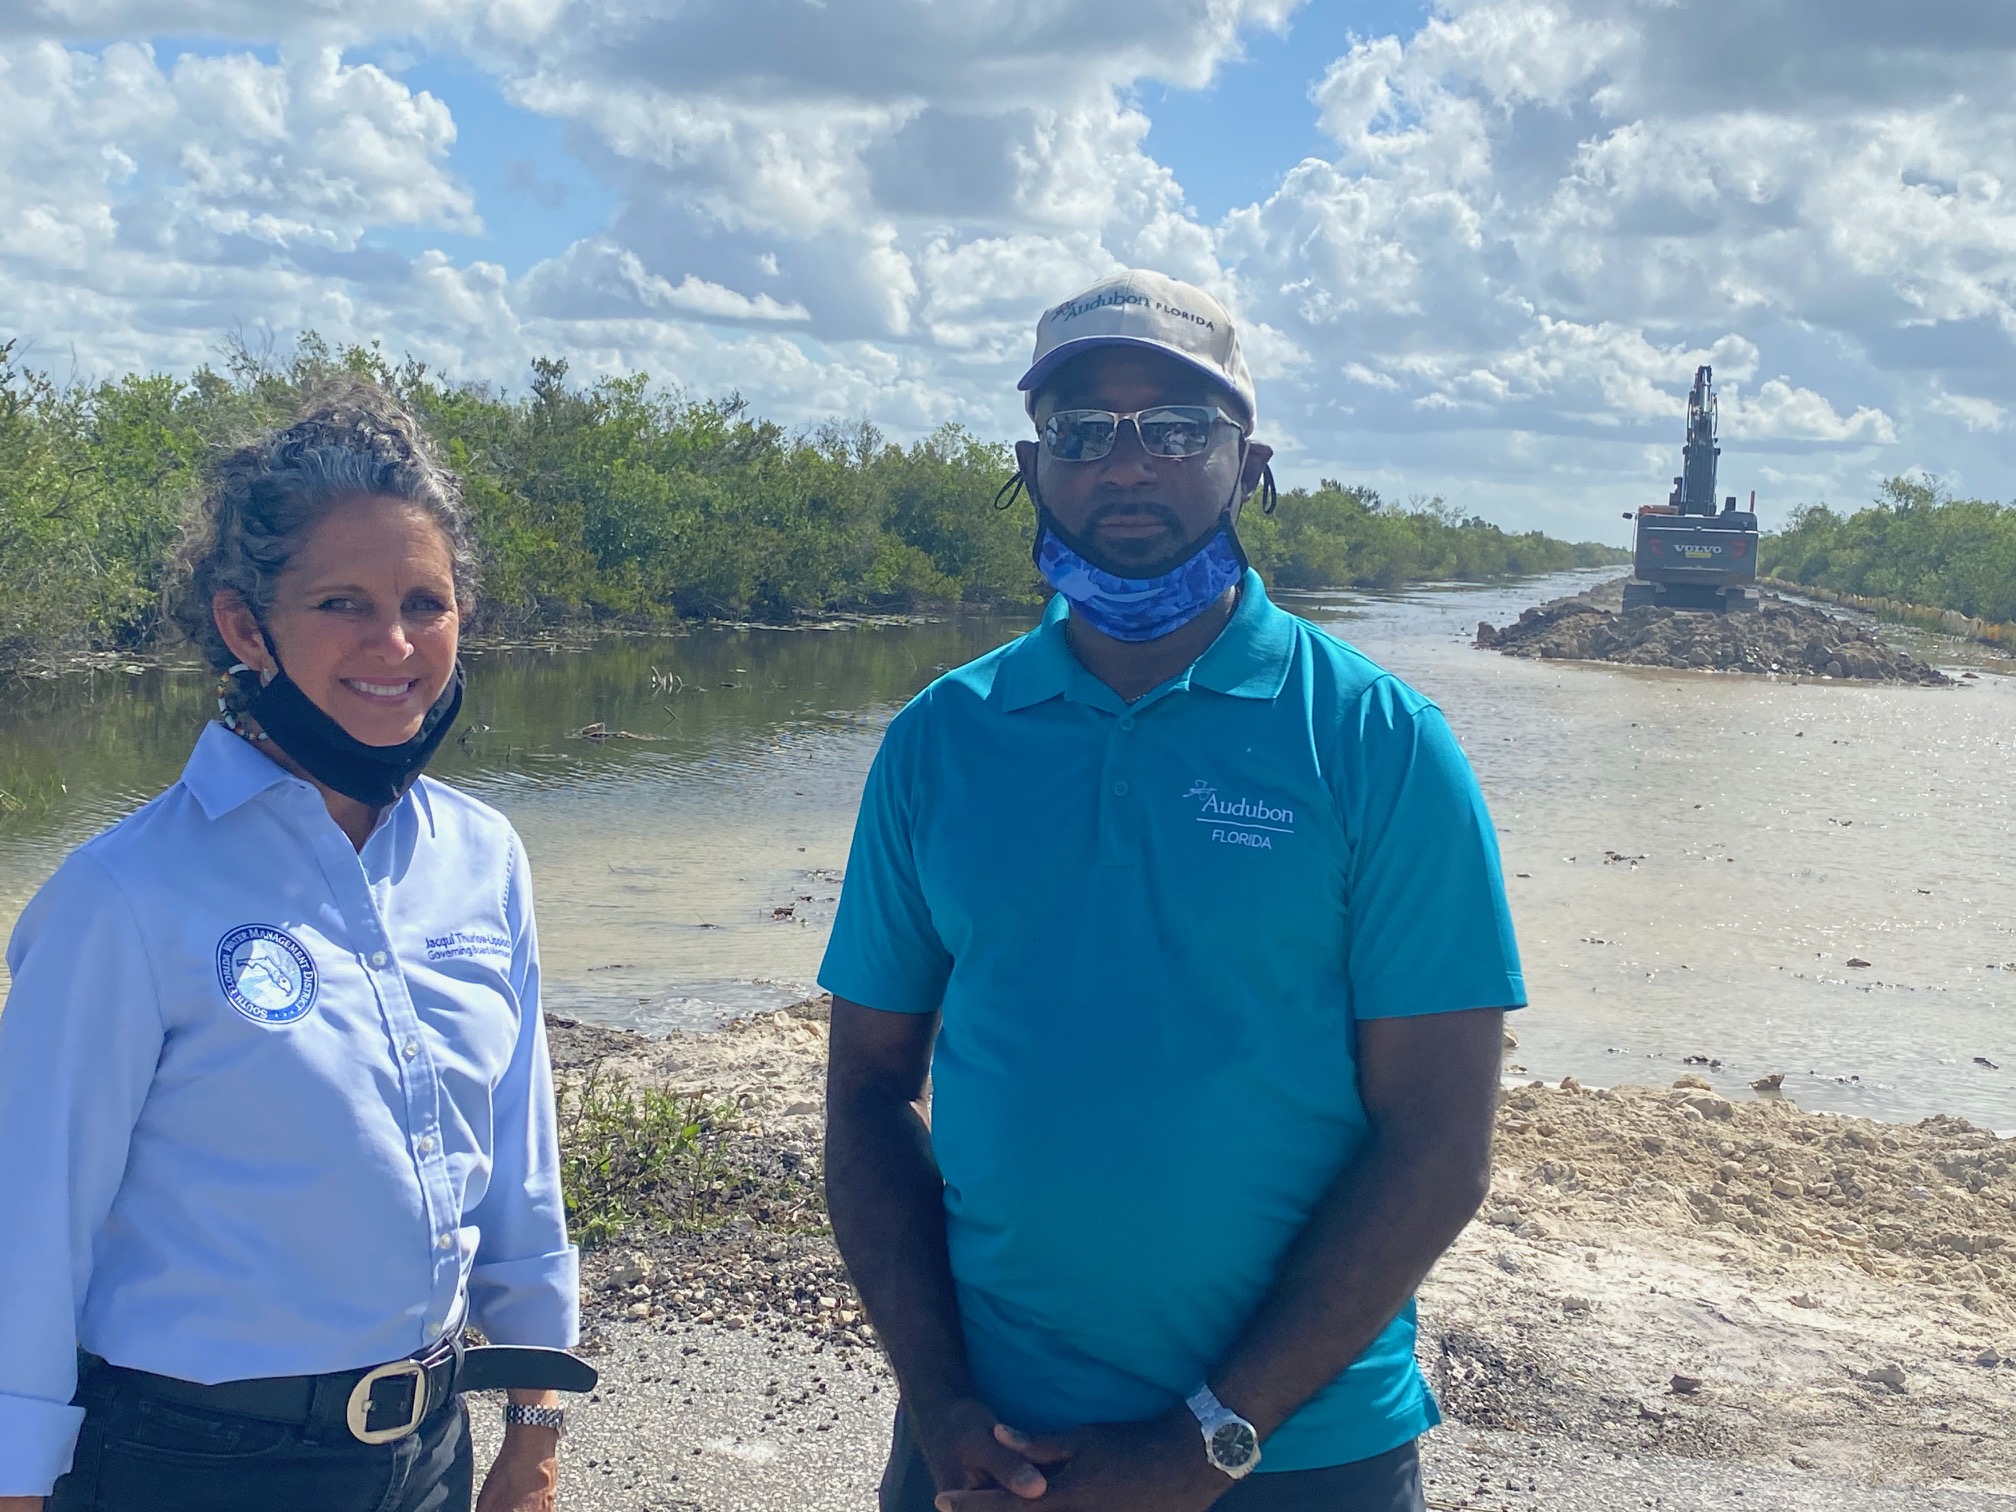 Northern Everglades Policy Analyst Doug Gaston with Jacqui Thurlow-Lippisch, governing board member of the South Florida Water Management District.